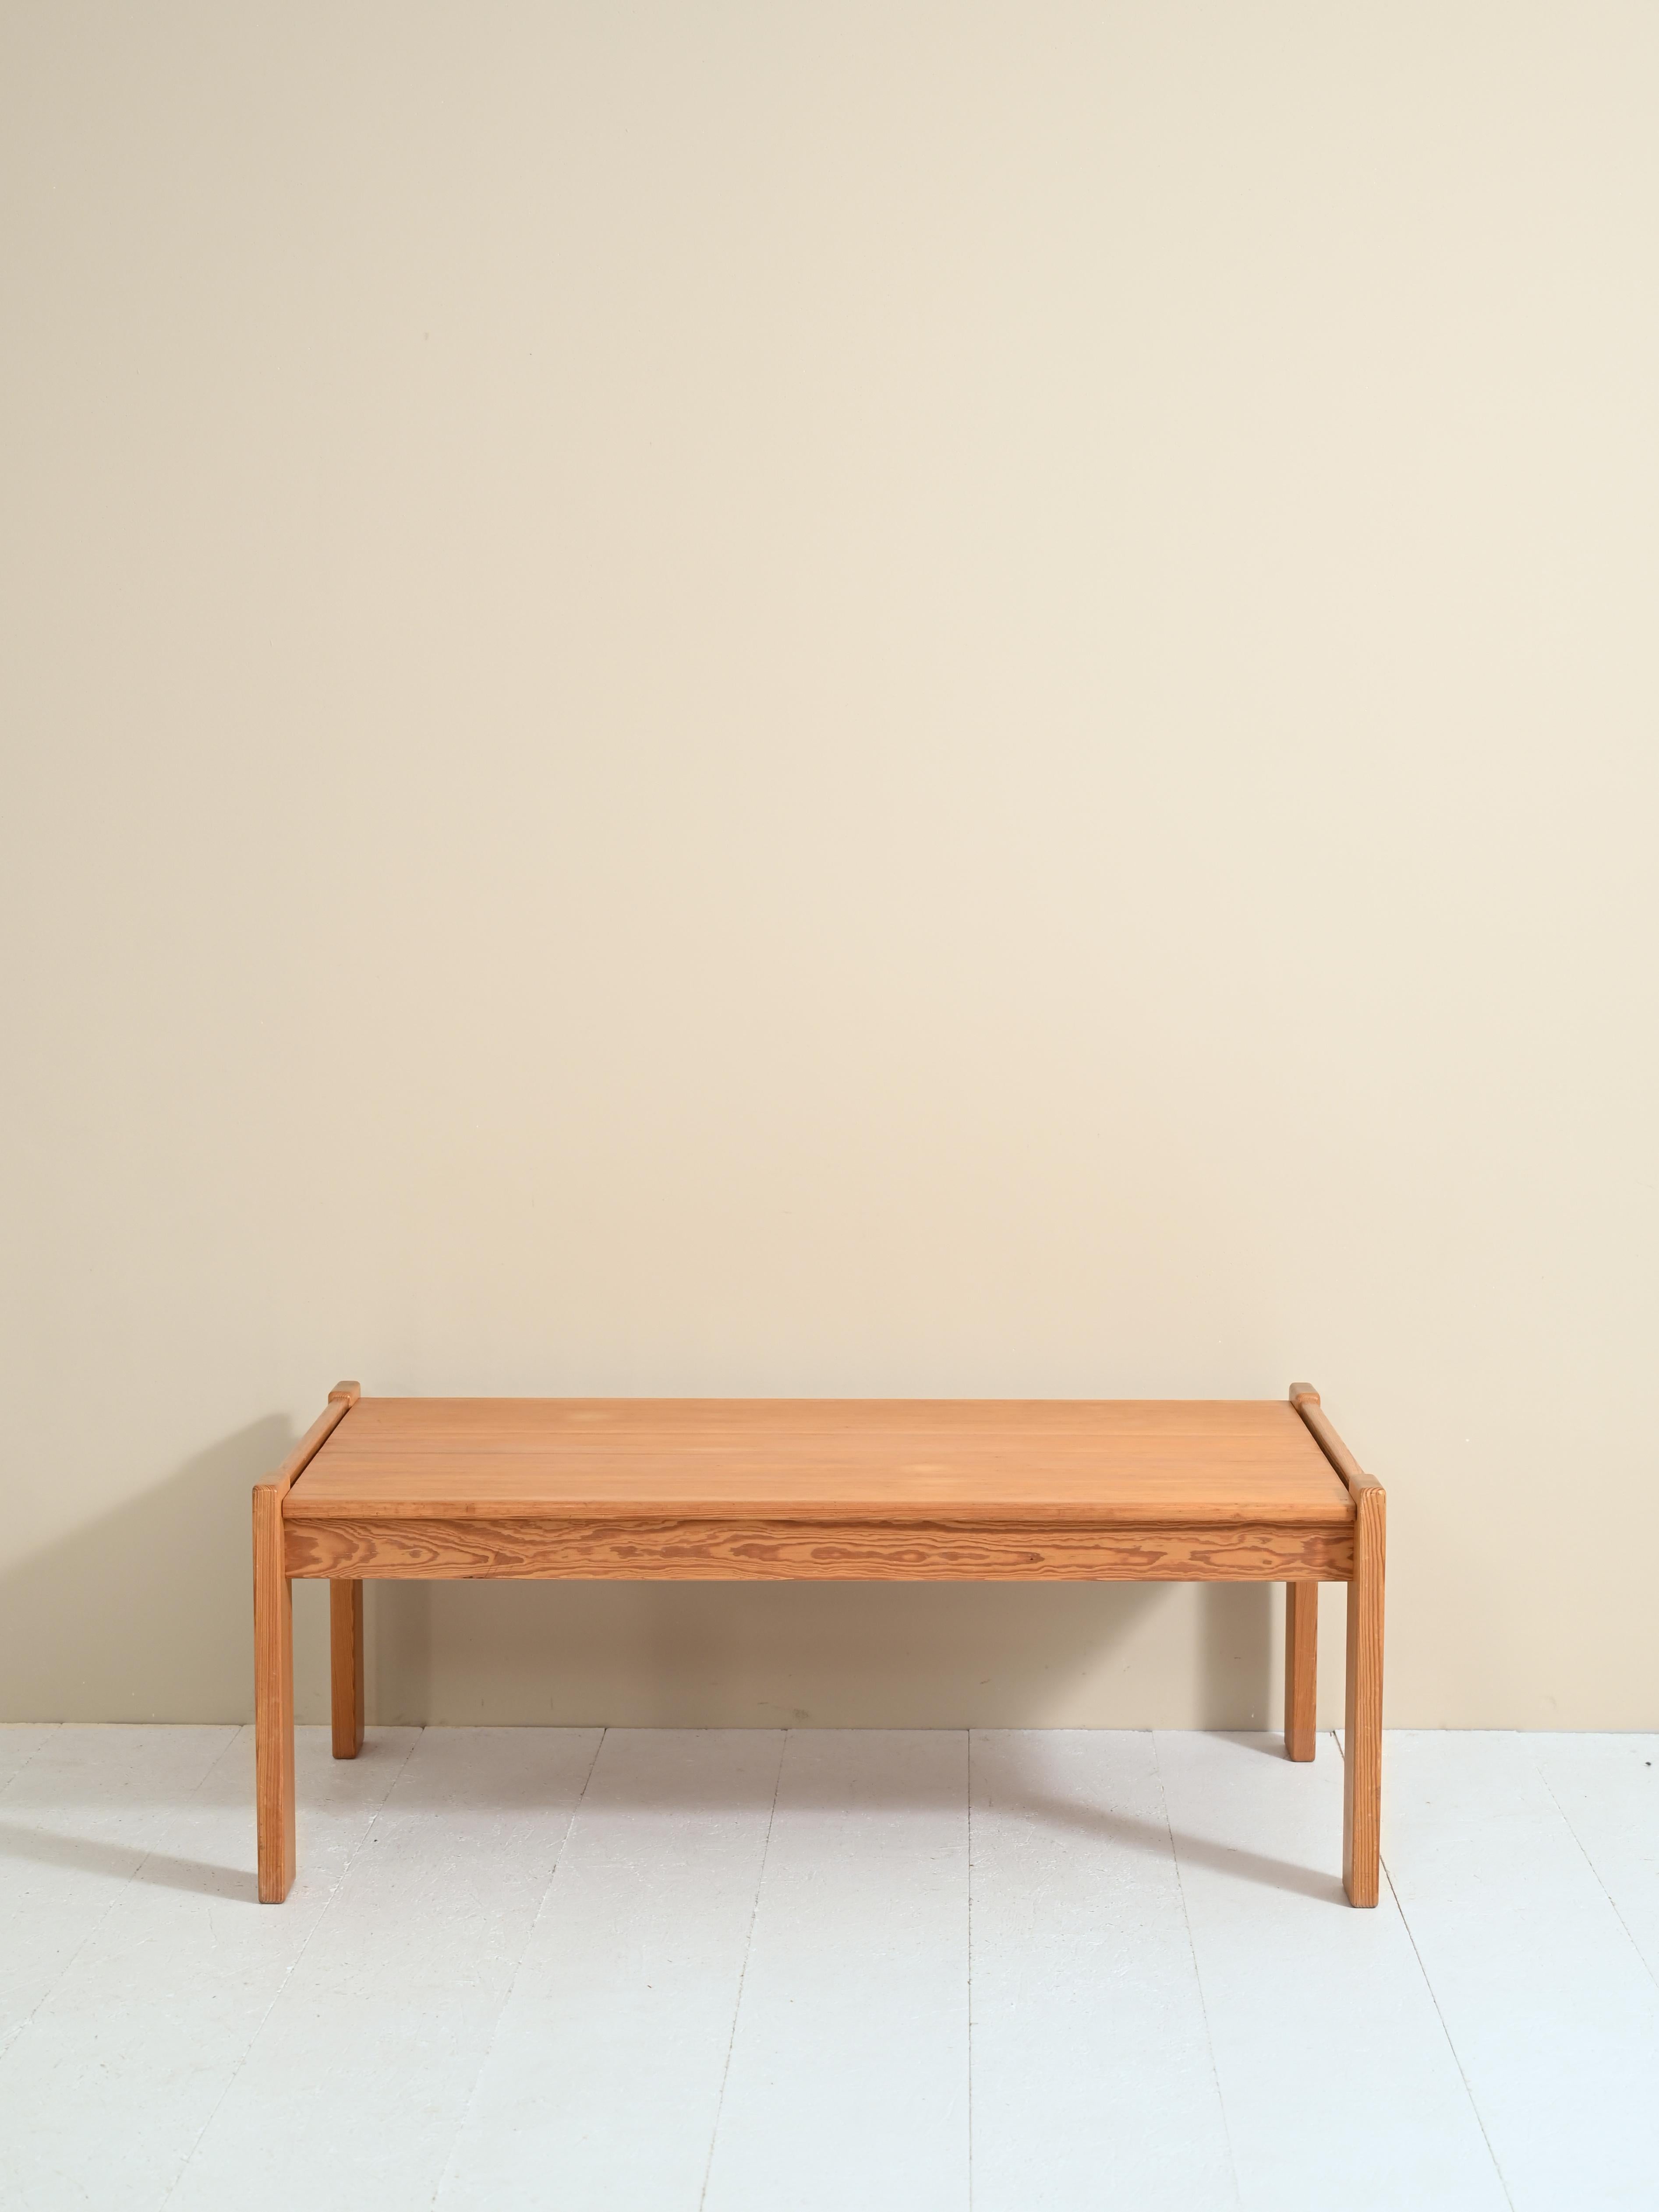 Yngve Ekström sofa table designed by Yngve Ekstom for Swedese in the 1970s.
The table is made of pine wood, recognizable by its light color and distinctive grain.
Ideal if you are looking for a design piece to furnish a room of significant